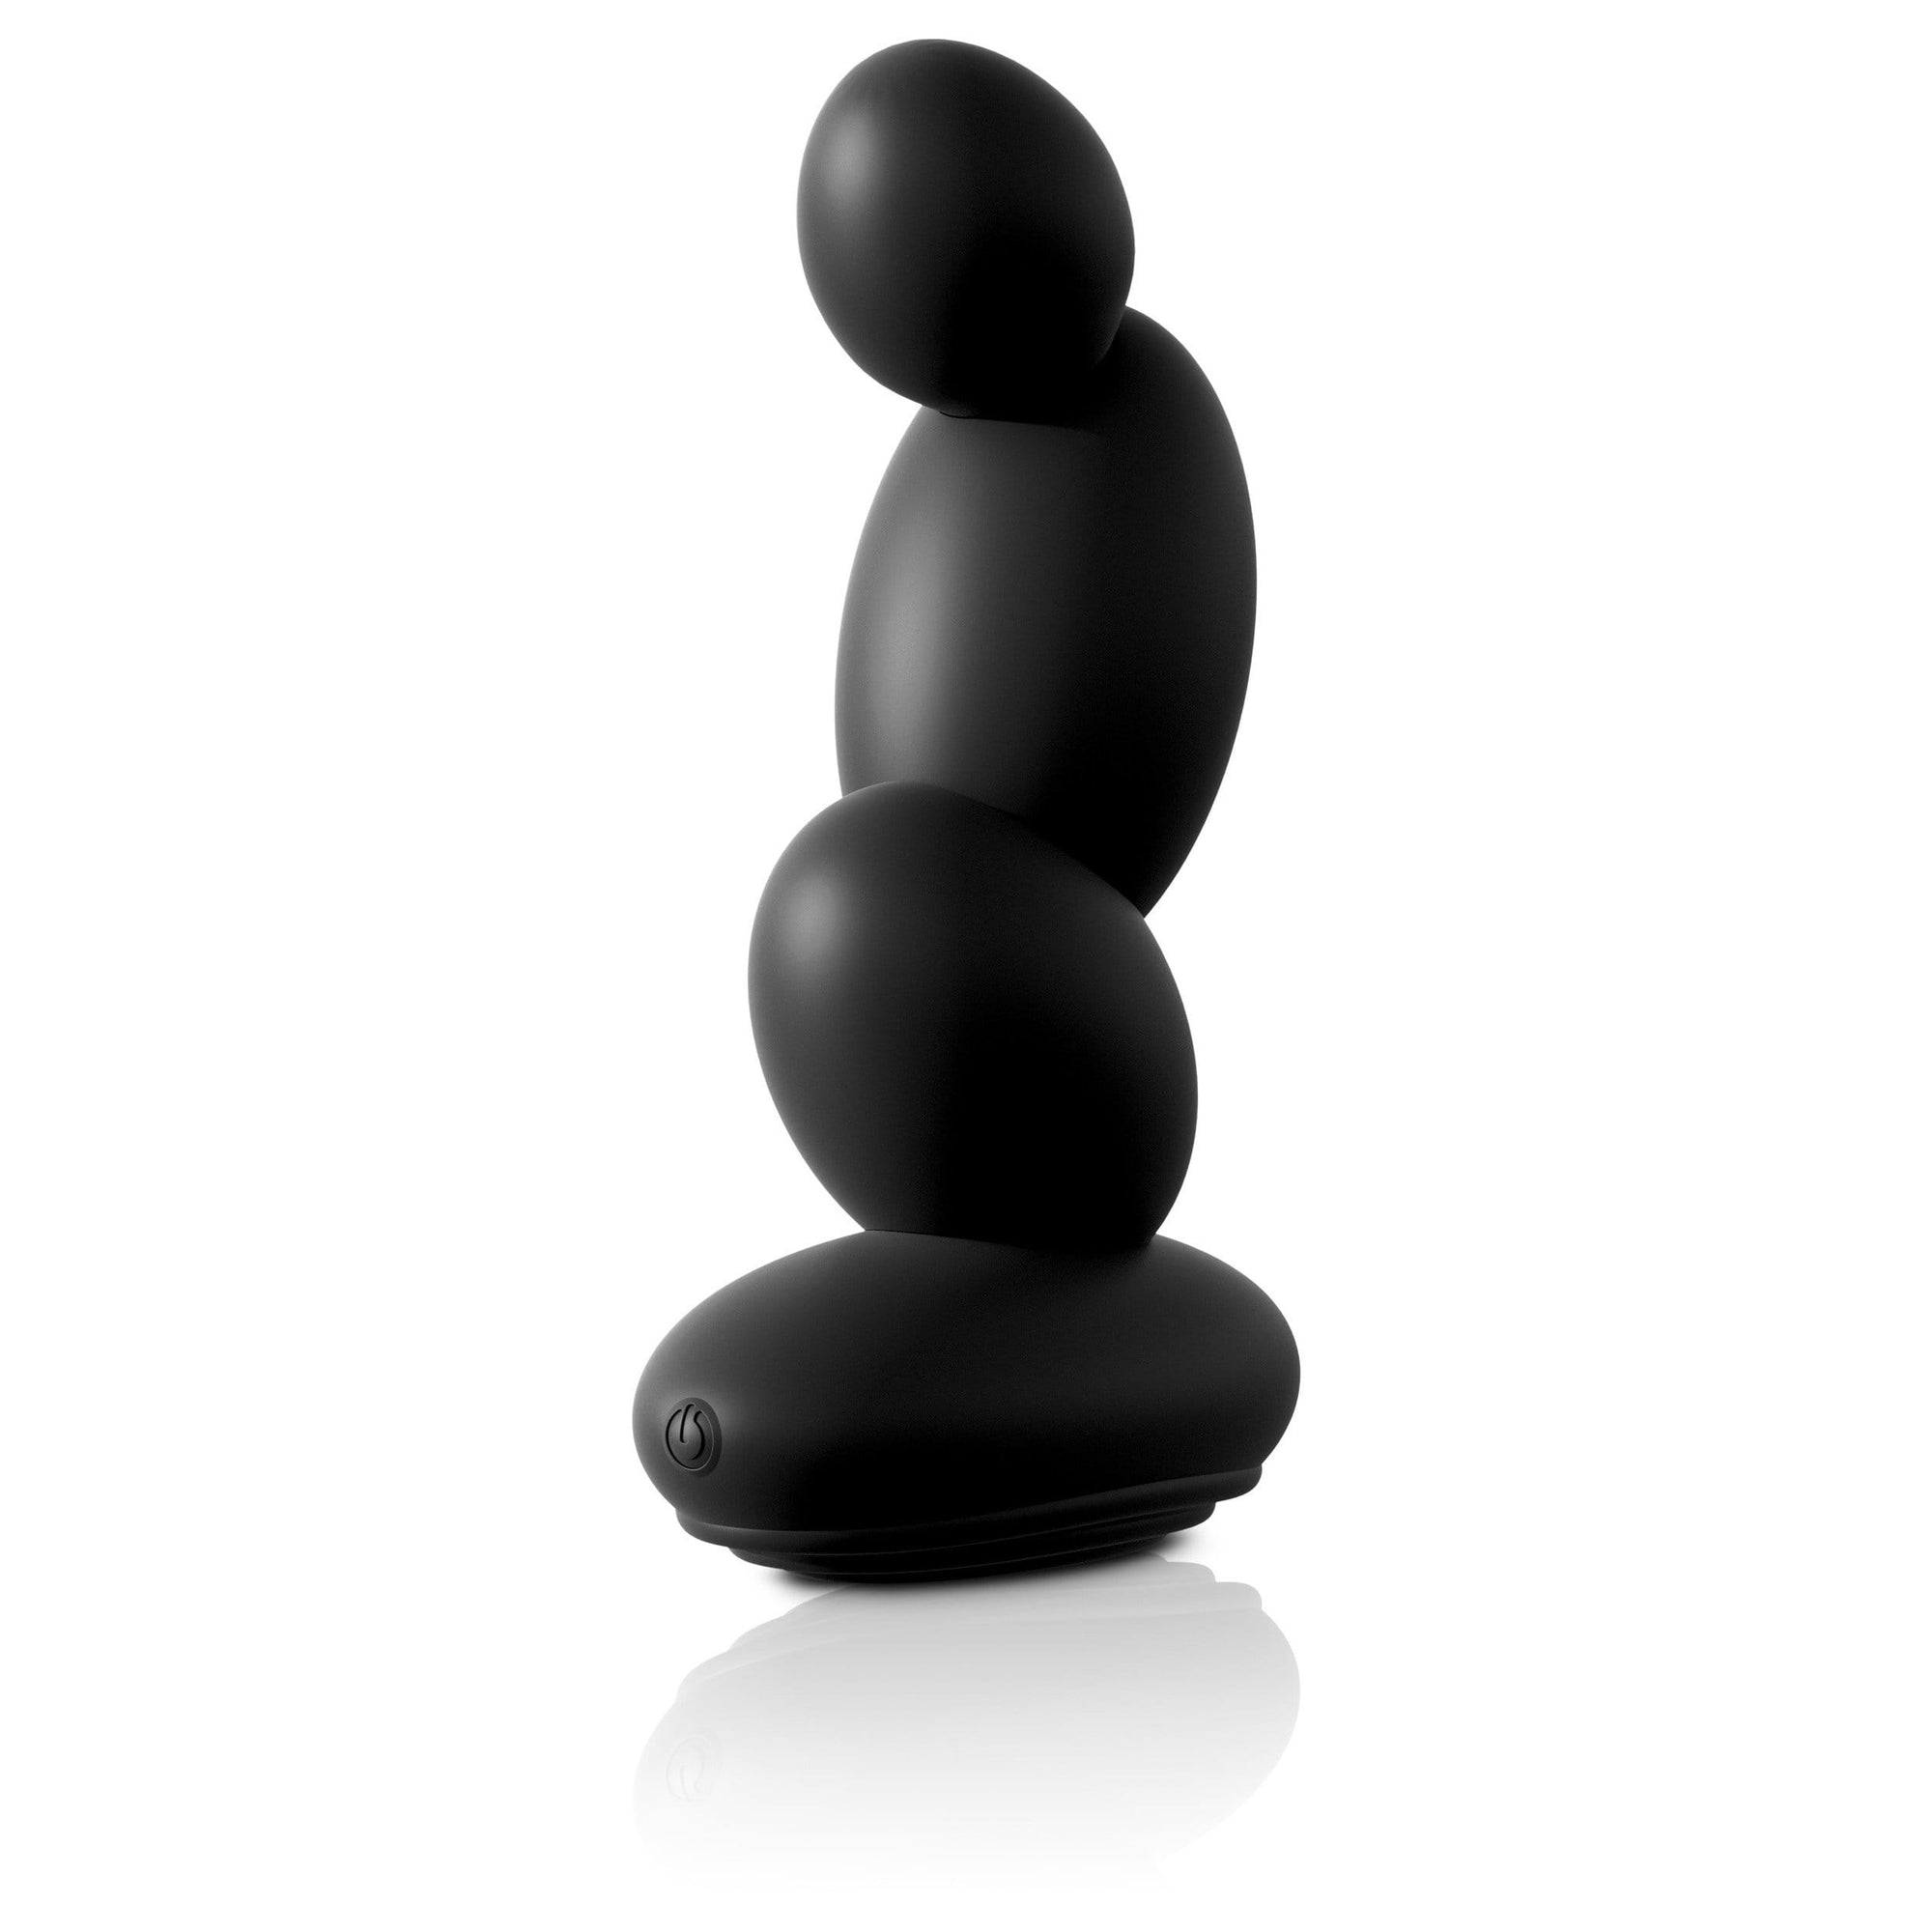 Sir Richards - Control Dual Motor Silicone P-Spot Massager (Black) -  Prostate Massager (Vibration) Rechargeable  Durio.sg